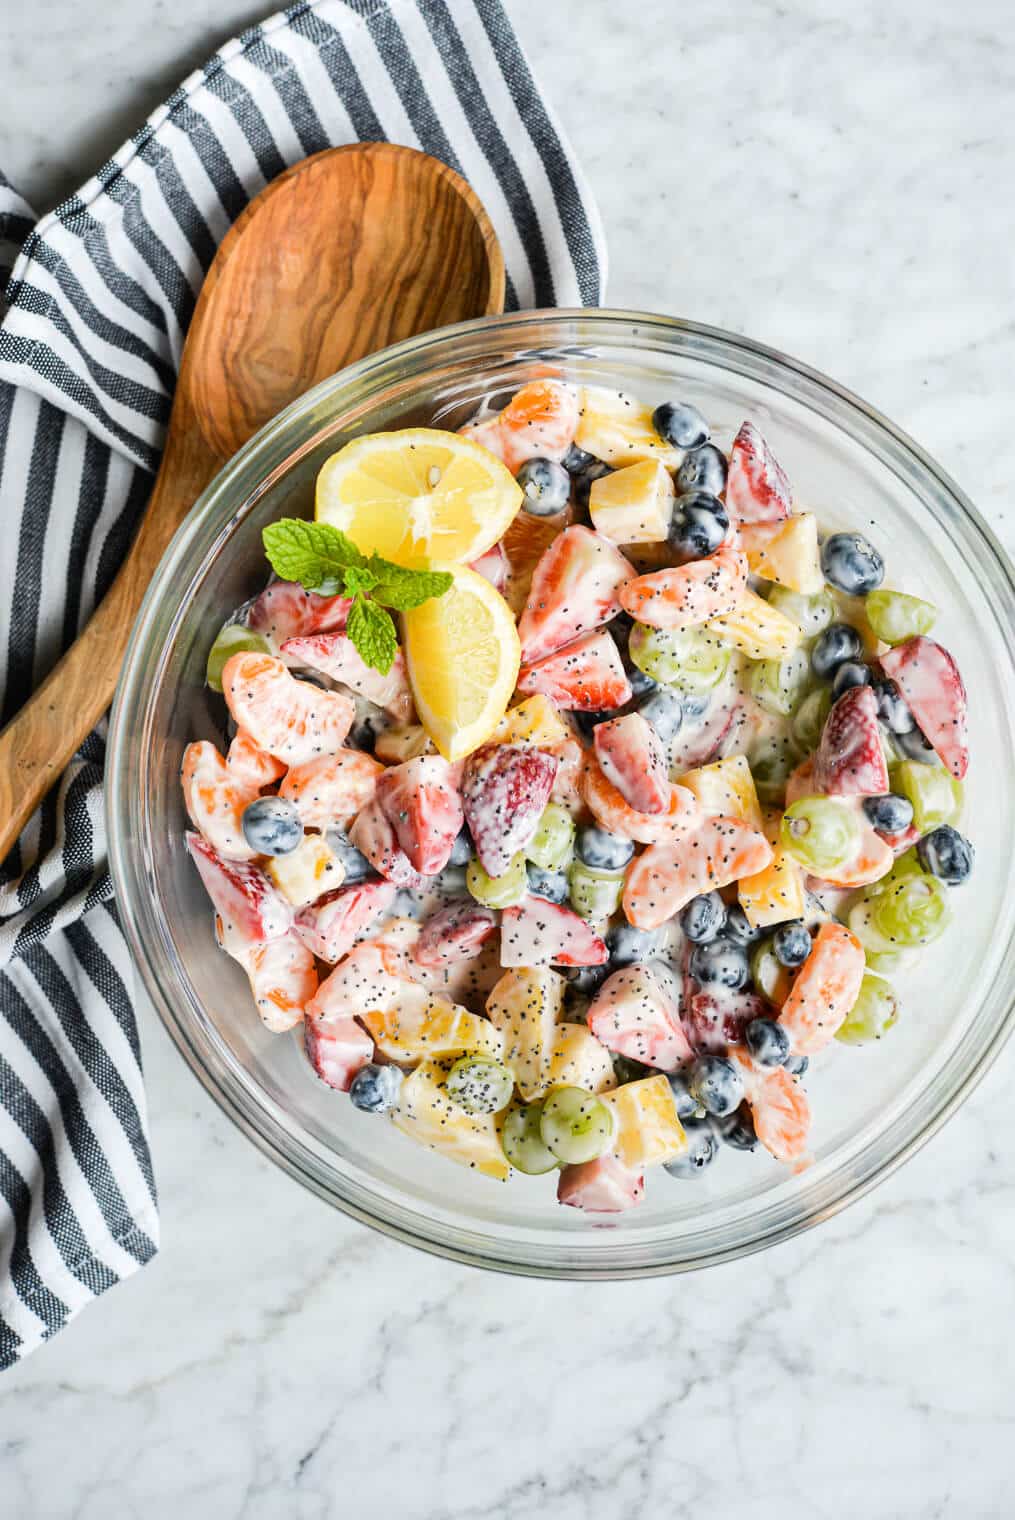 ready to eat yogurt fruit salad in a large glass bowl next to a wooden spoon and striped kitchen towel on a marble surface